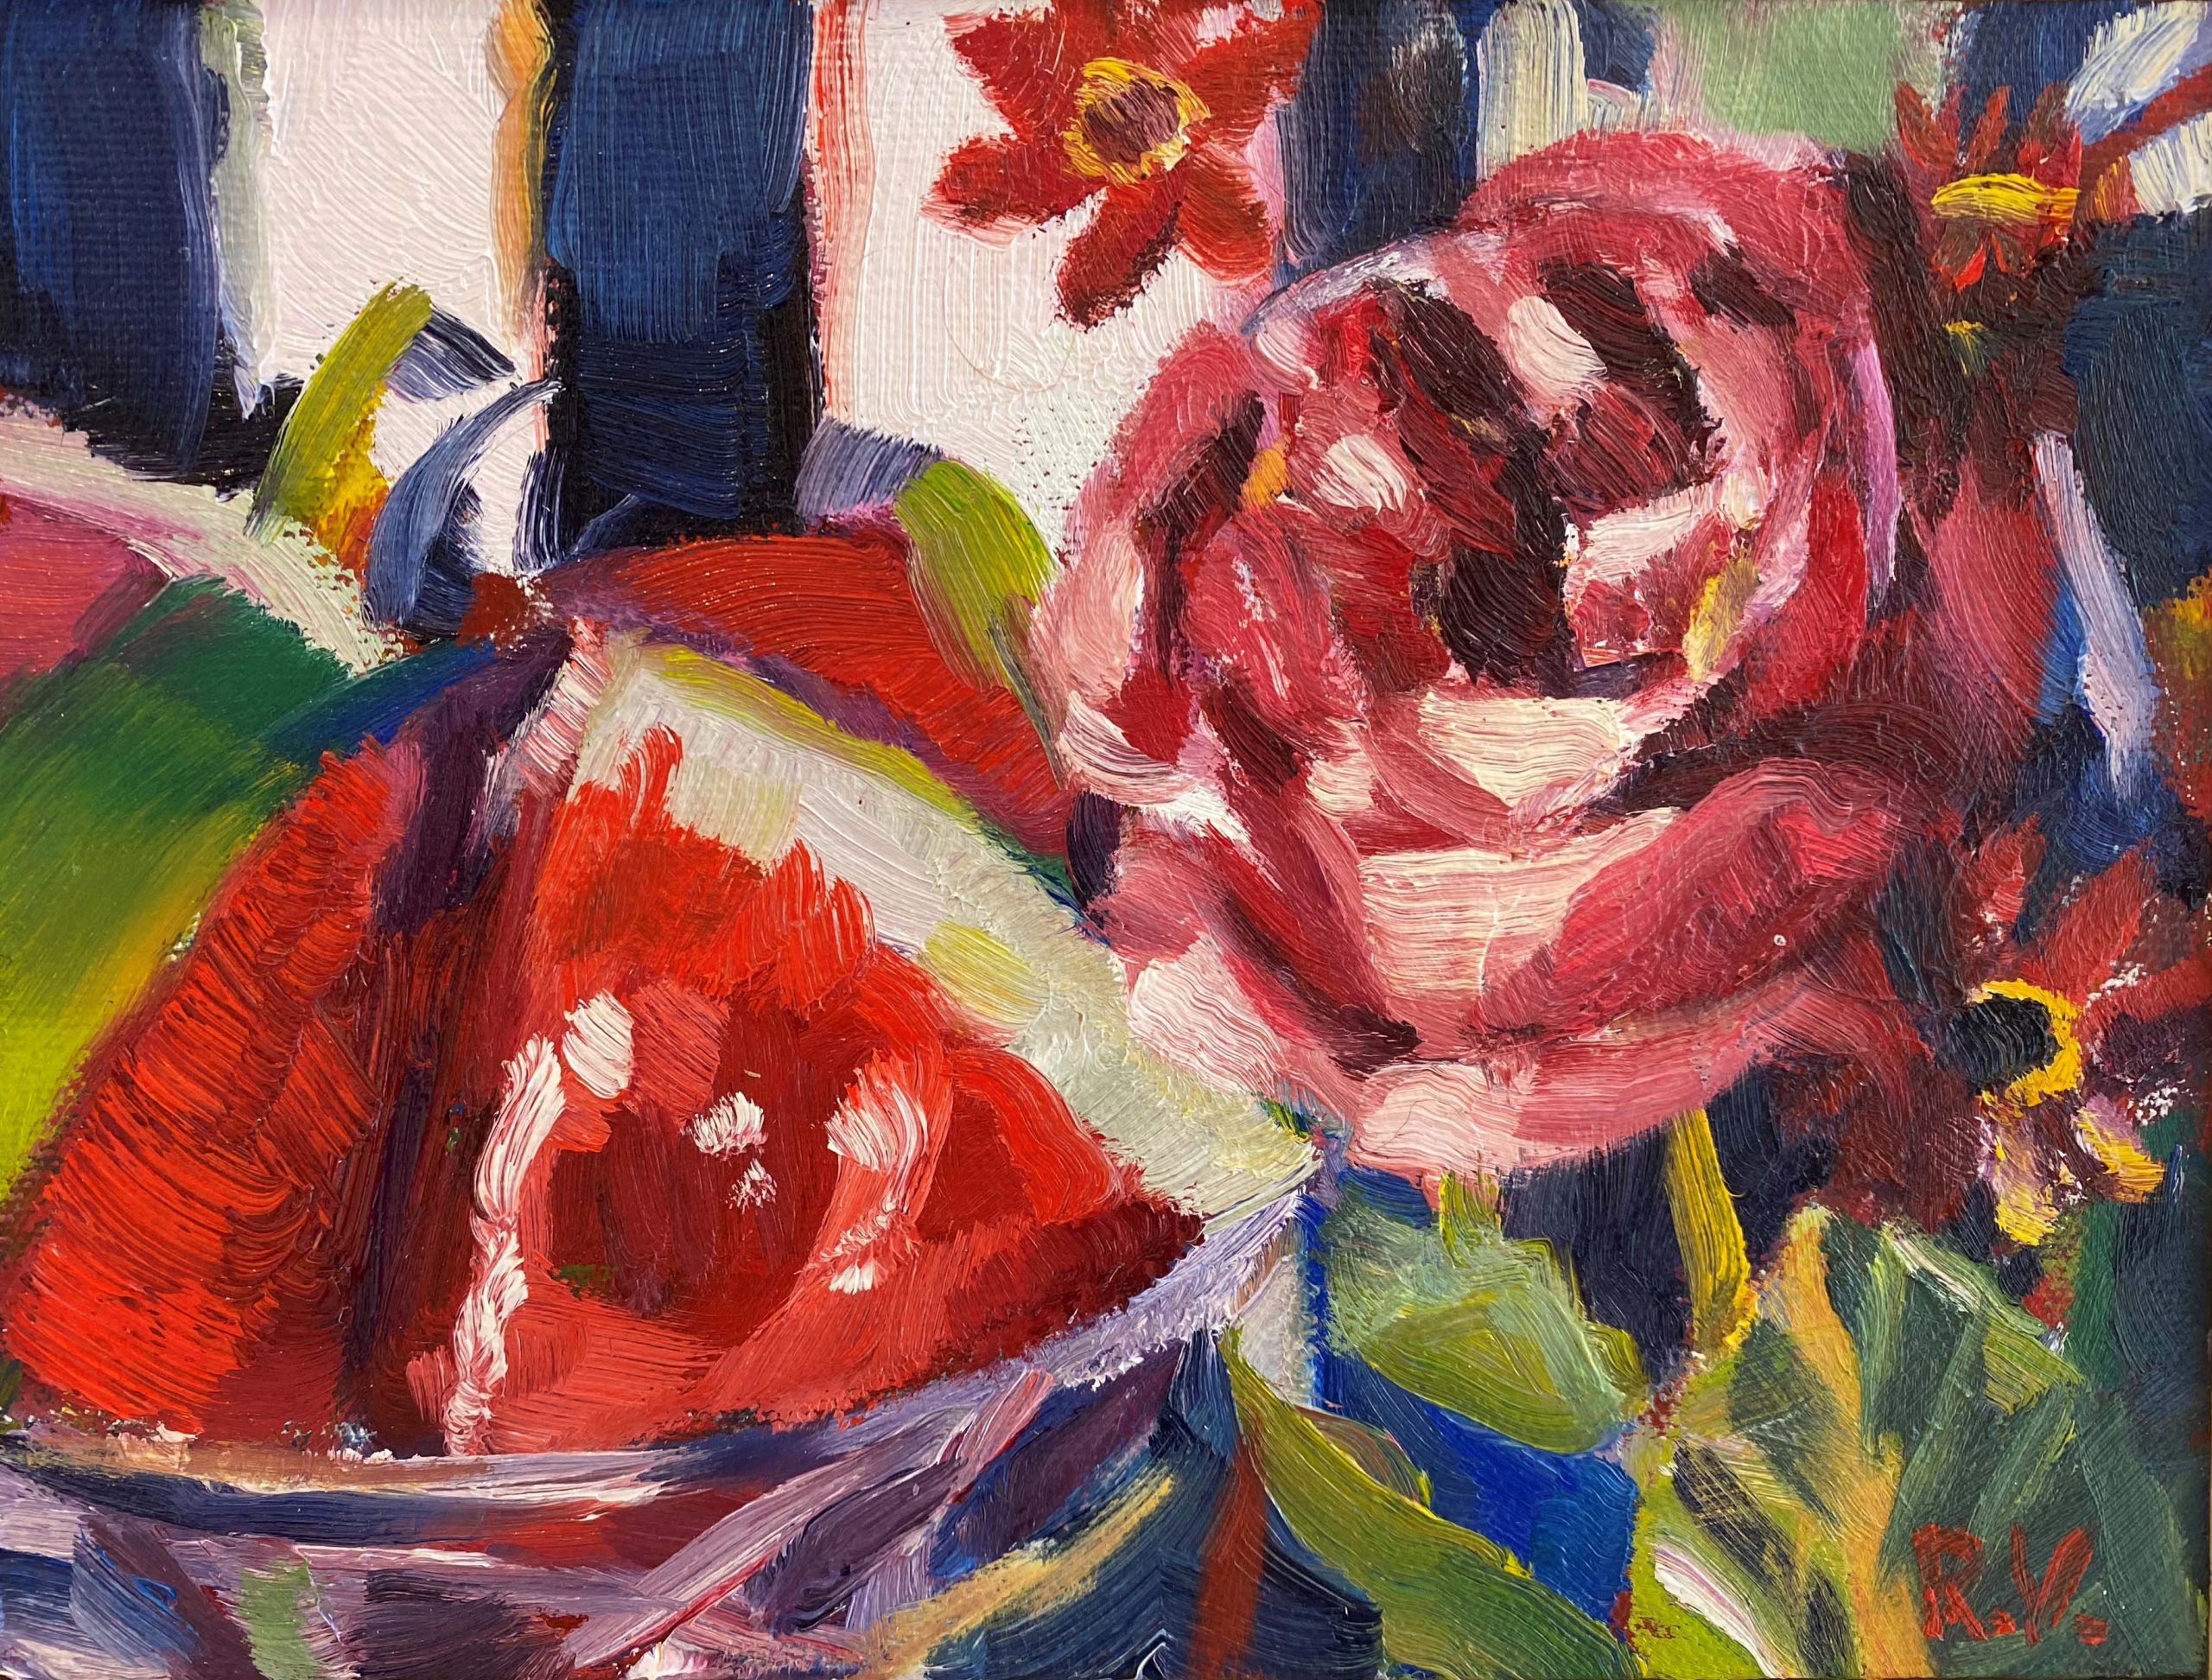 Rosemary Valadon 'Watermelon and Rose' oil on board 16 x 21cm $2,300